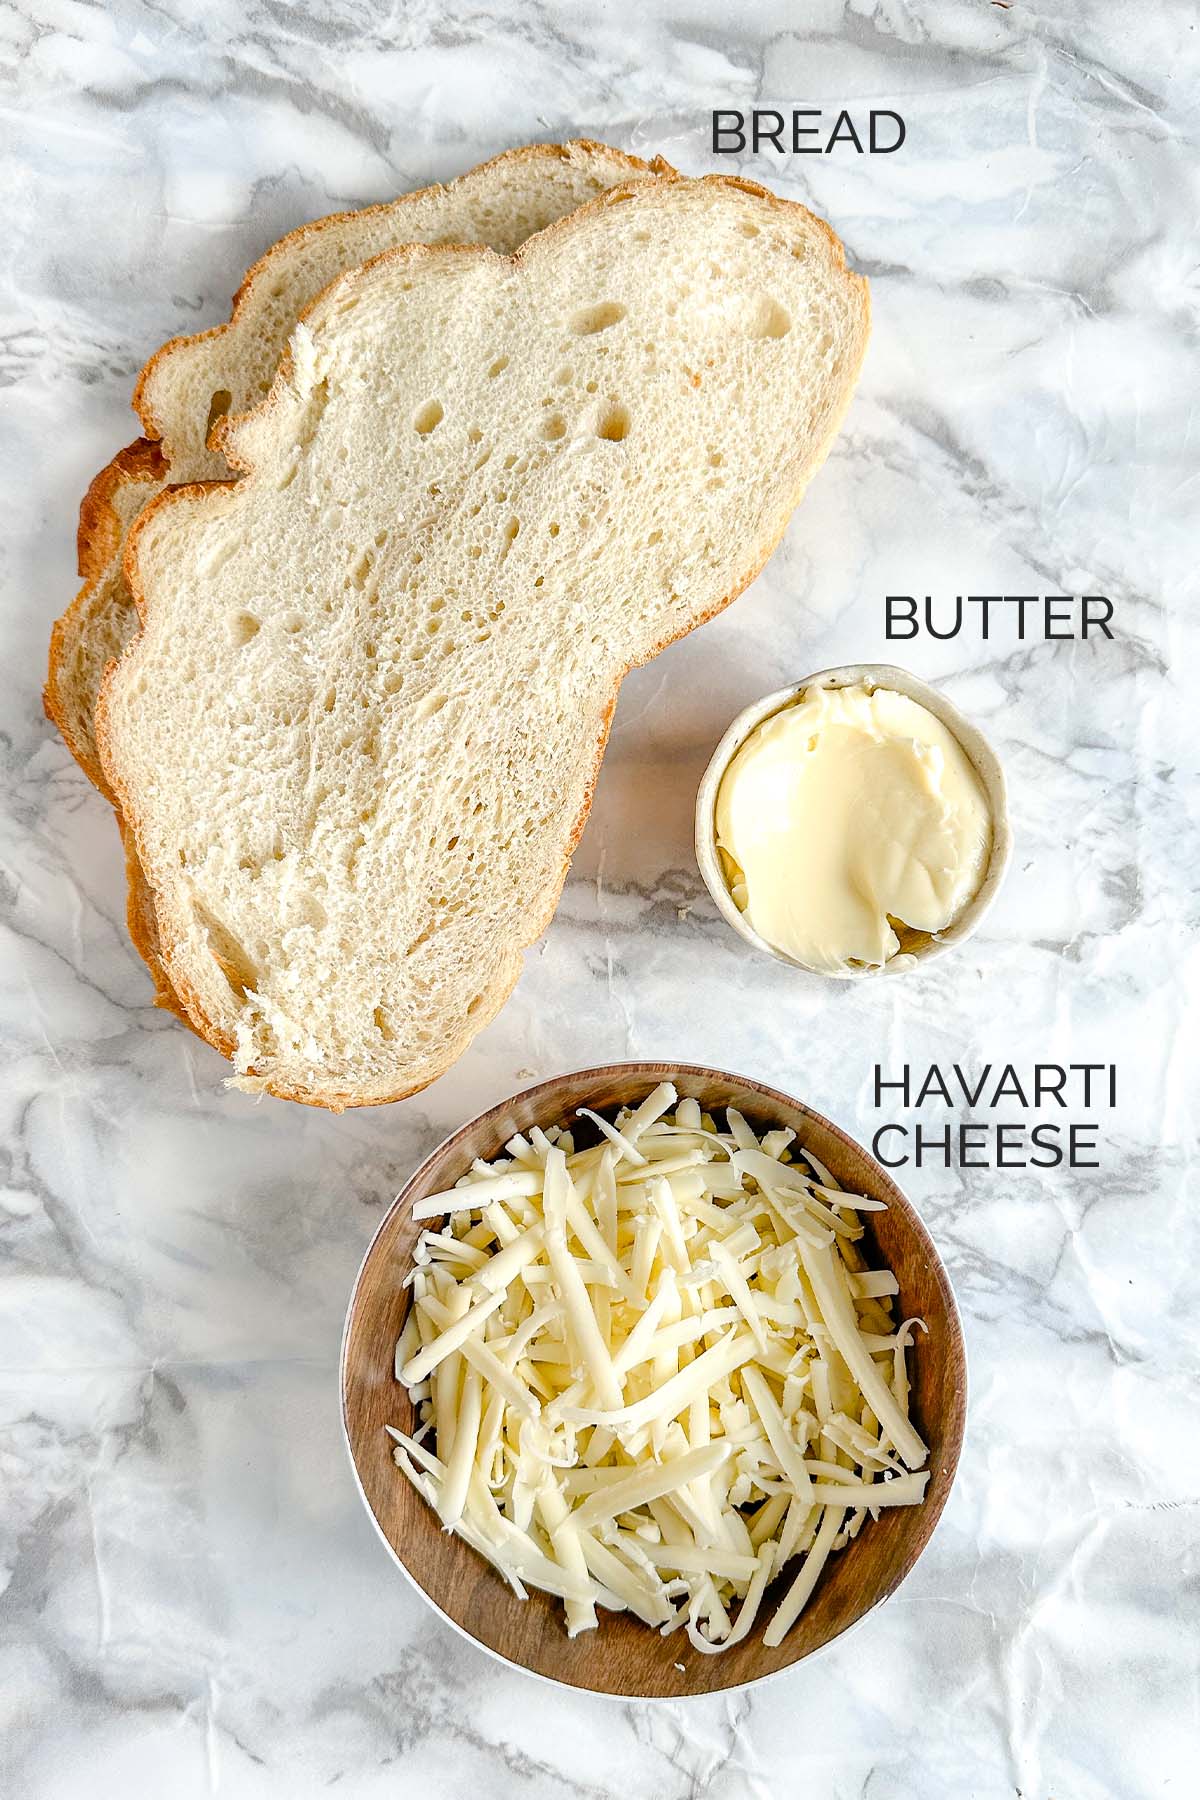 2 slices of bread, a bowl with butter, and a bowl with shredded cheese on a white marble counter.